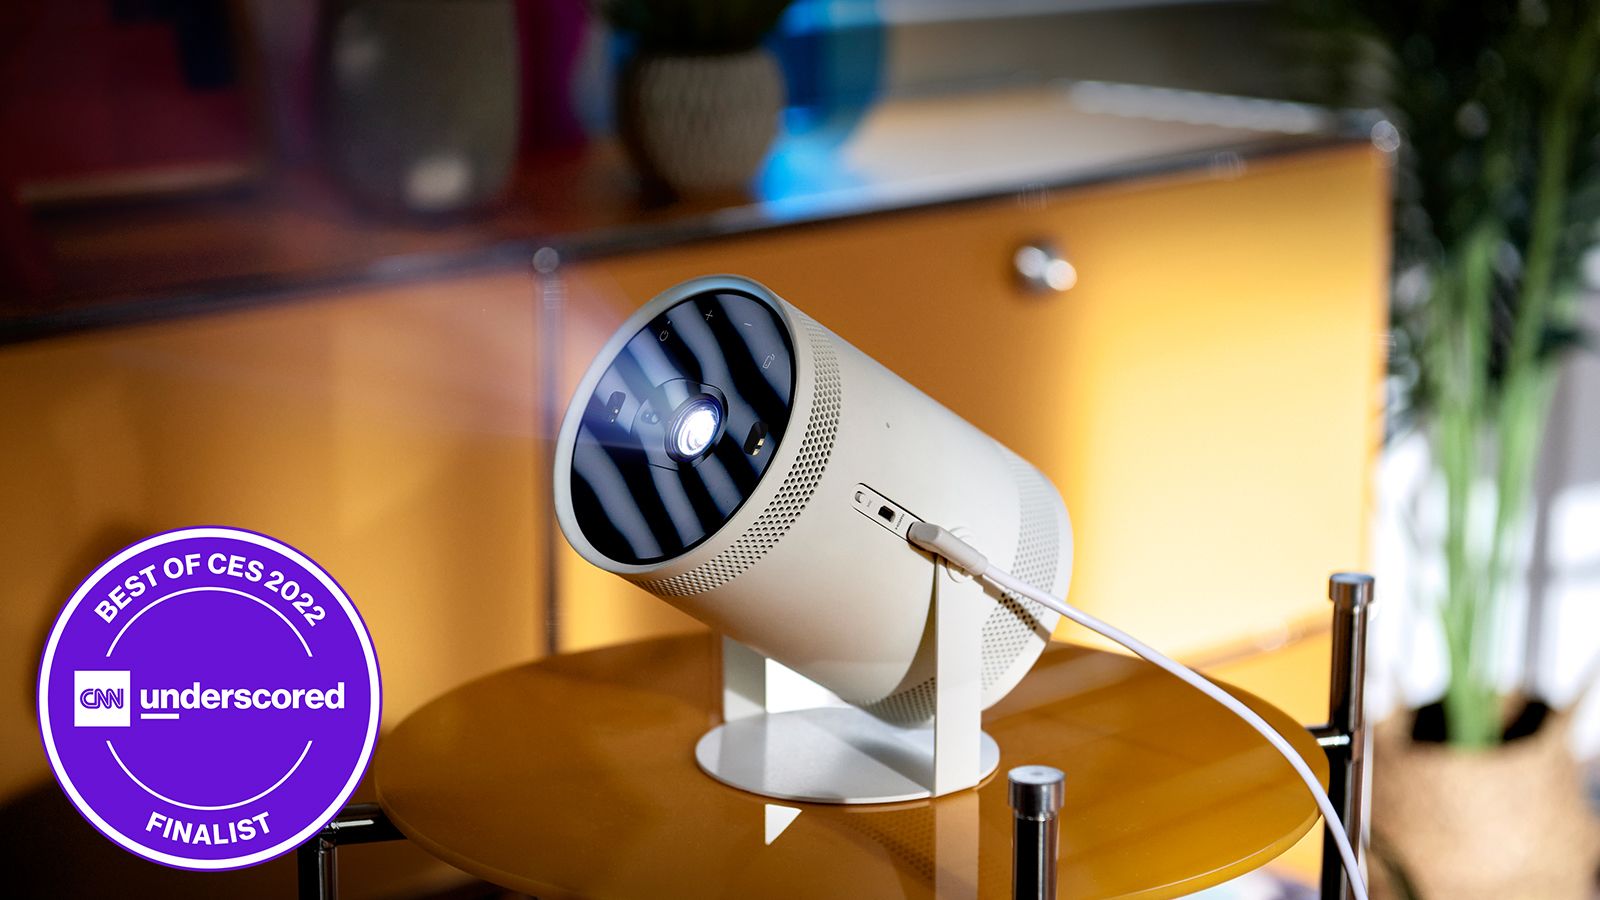 Samsung's new ultra tiny projector can replace your TV, smart speaker, lamp and more